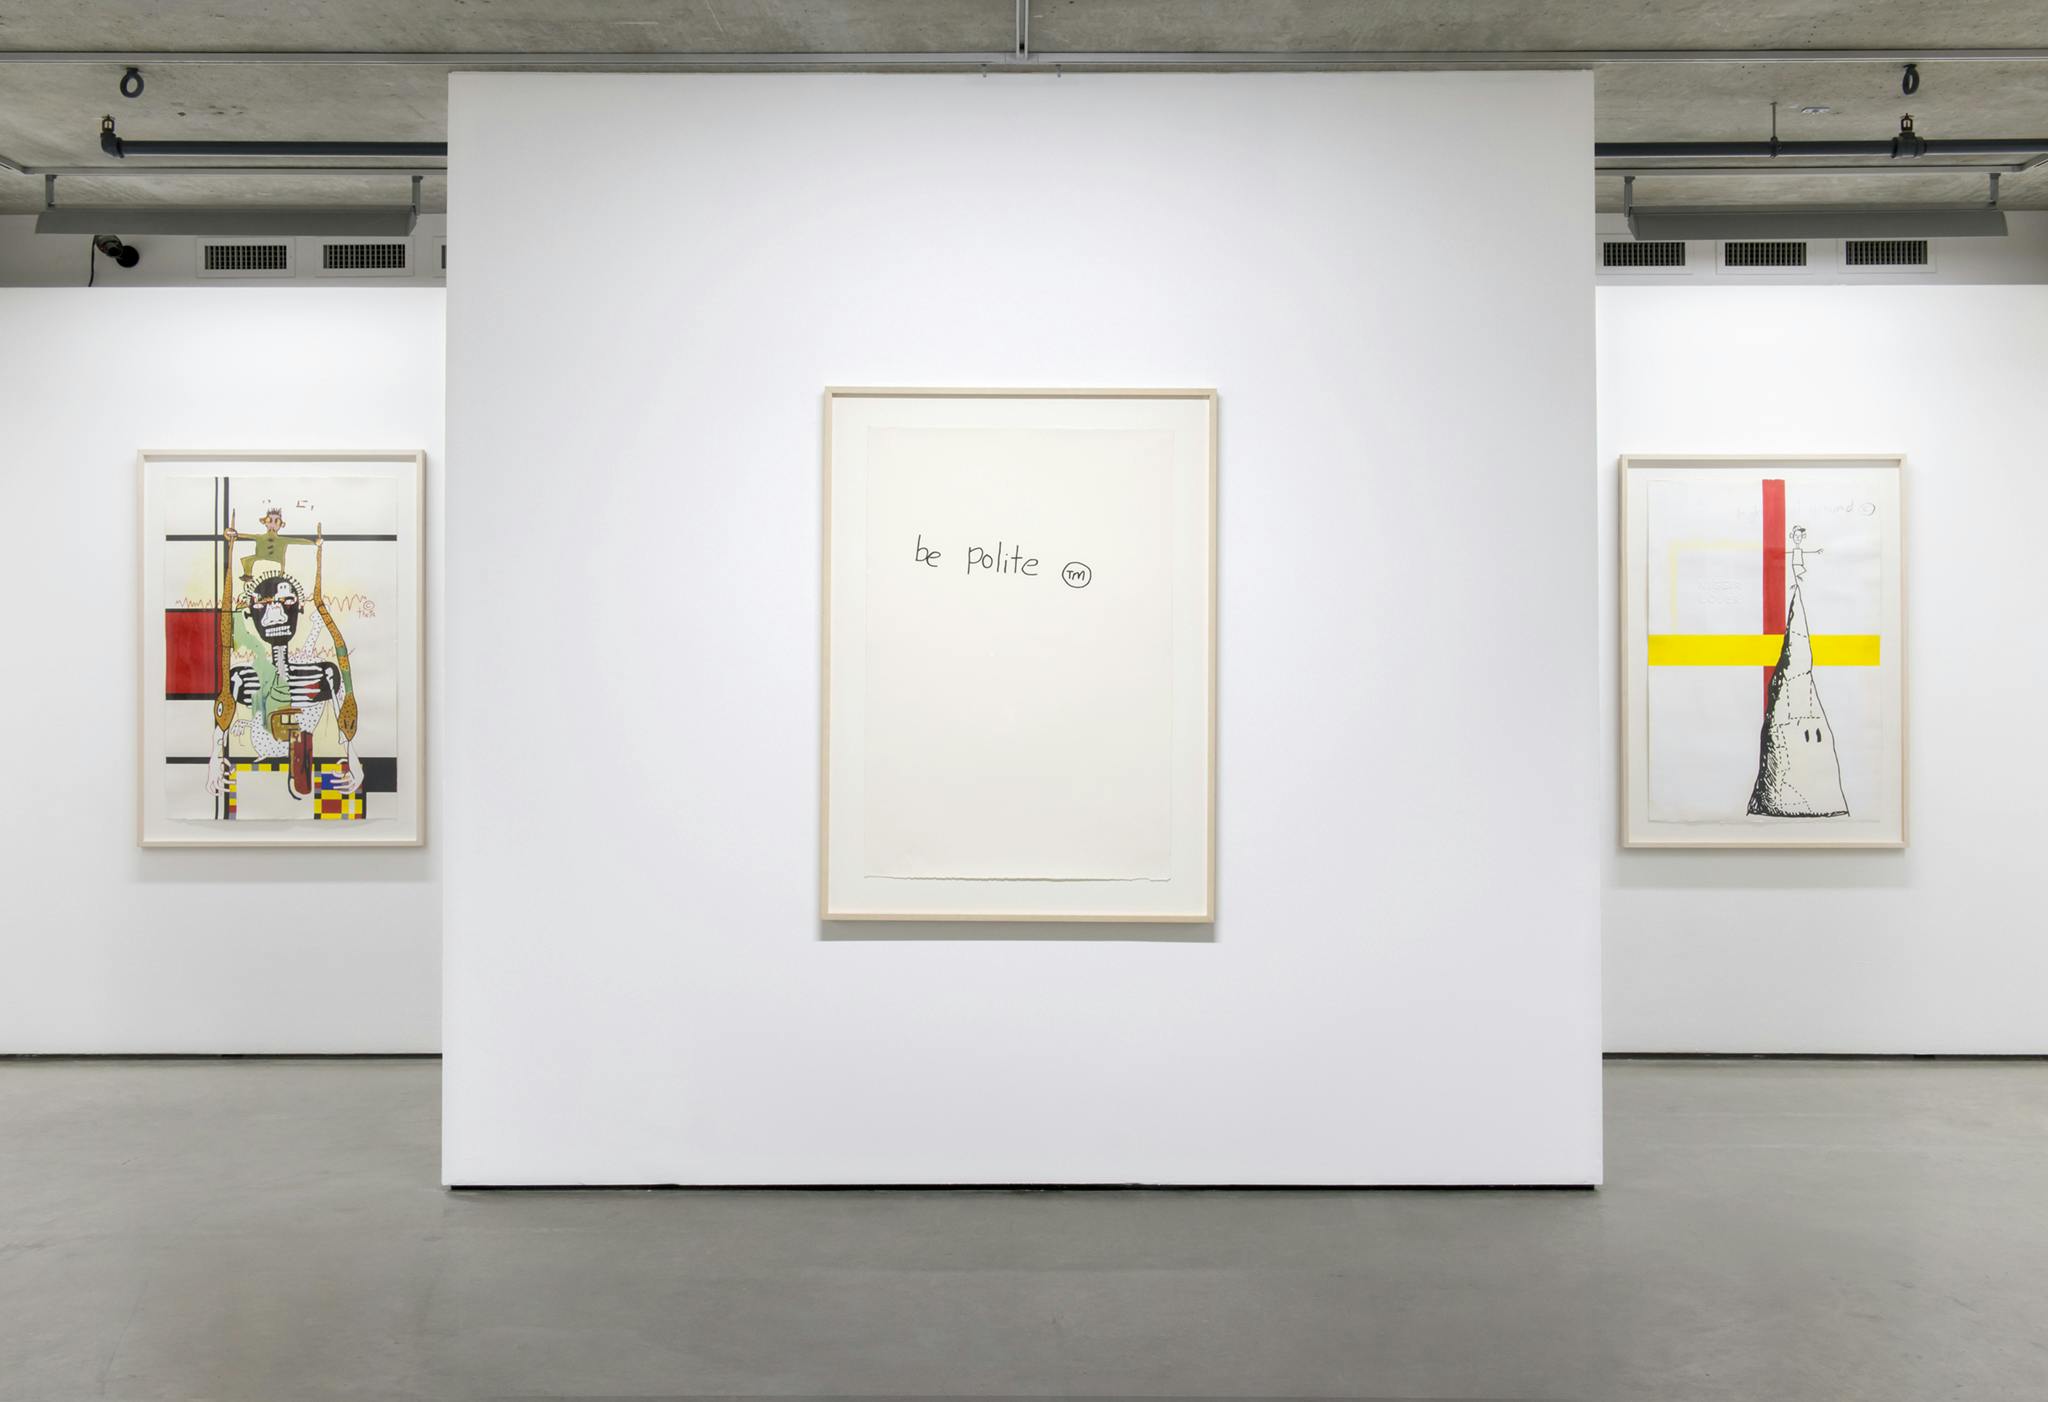 Image of a freestanding wall in front of another gallery wall. On the center wall hangs a framed work on paper that reads “BE POLITE.” Two more framed drawings hang on the back wall on either side.